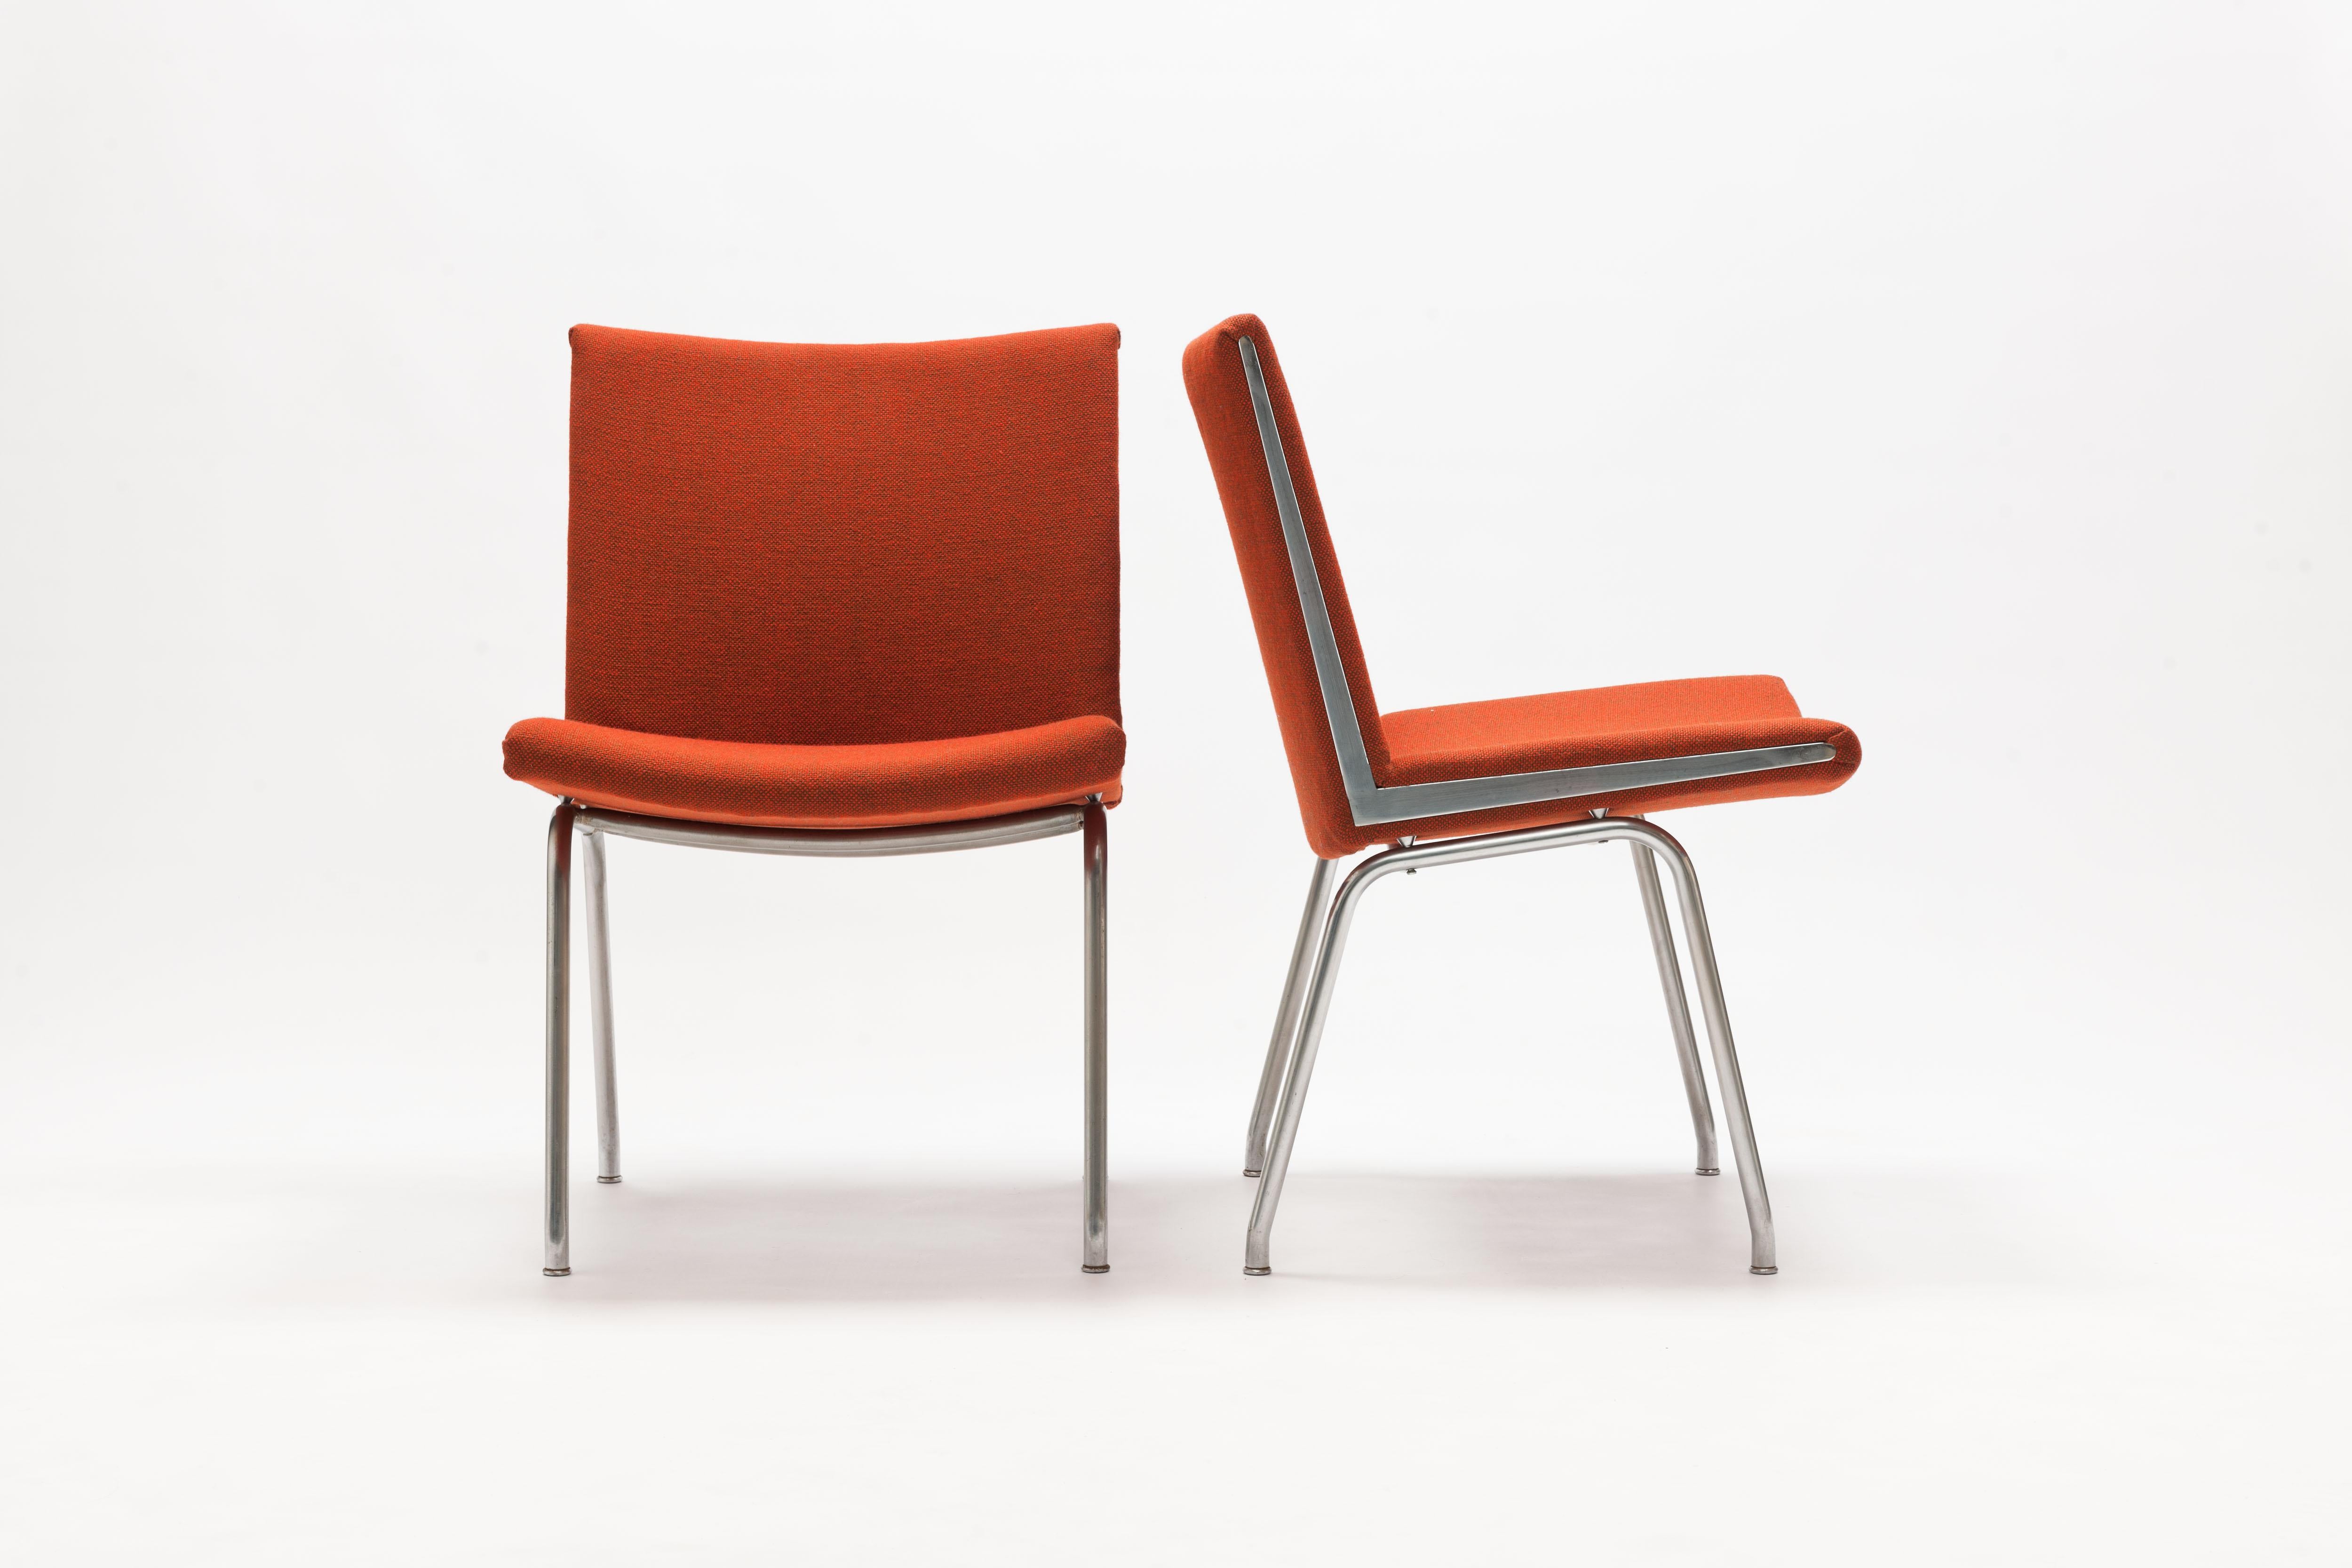 Pair of Hans Wegner AP37 'Airport' Chairs by A.P. Stolen Denmark, 
Exceptional modern designed chairs on steel frames with sharp triangle shape chrome details on both sides of each seat. 
Seats are upholstered in a red Hallingdal fabric. This is a